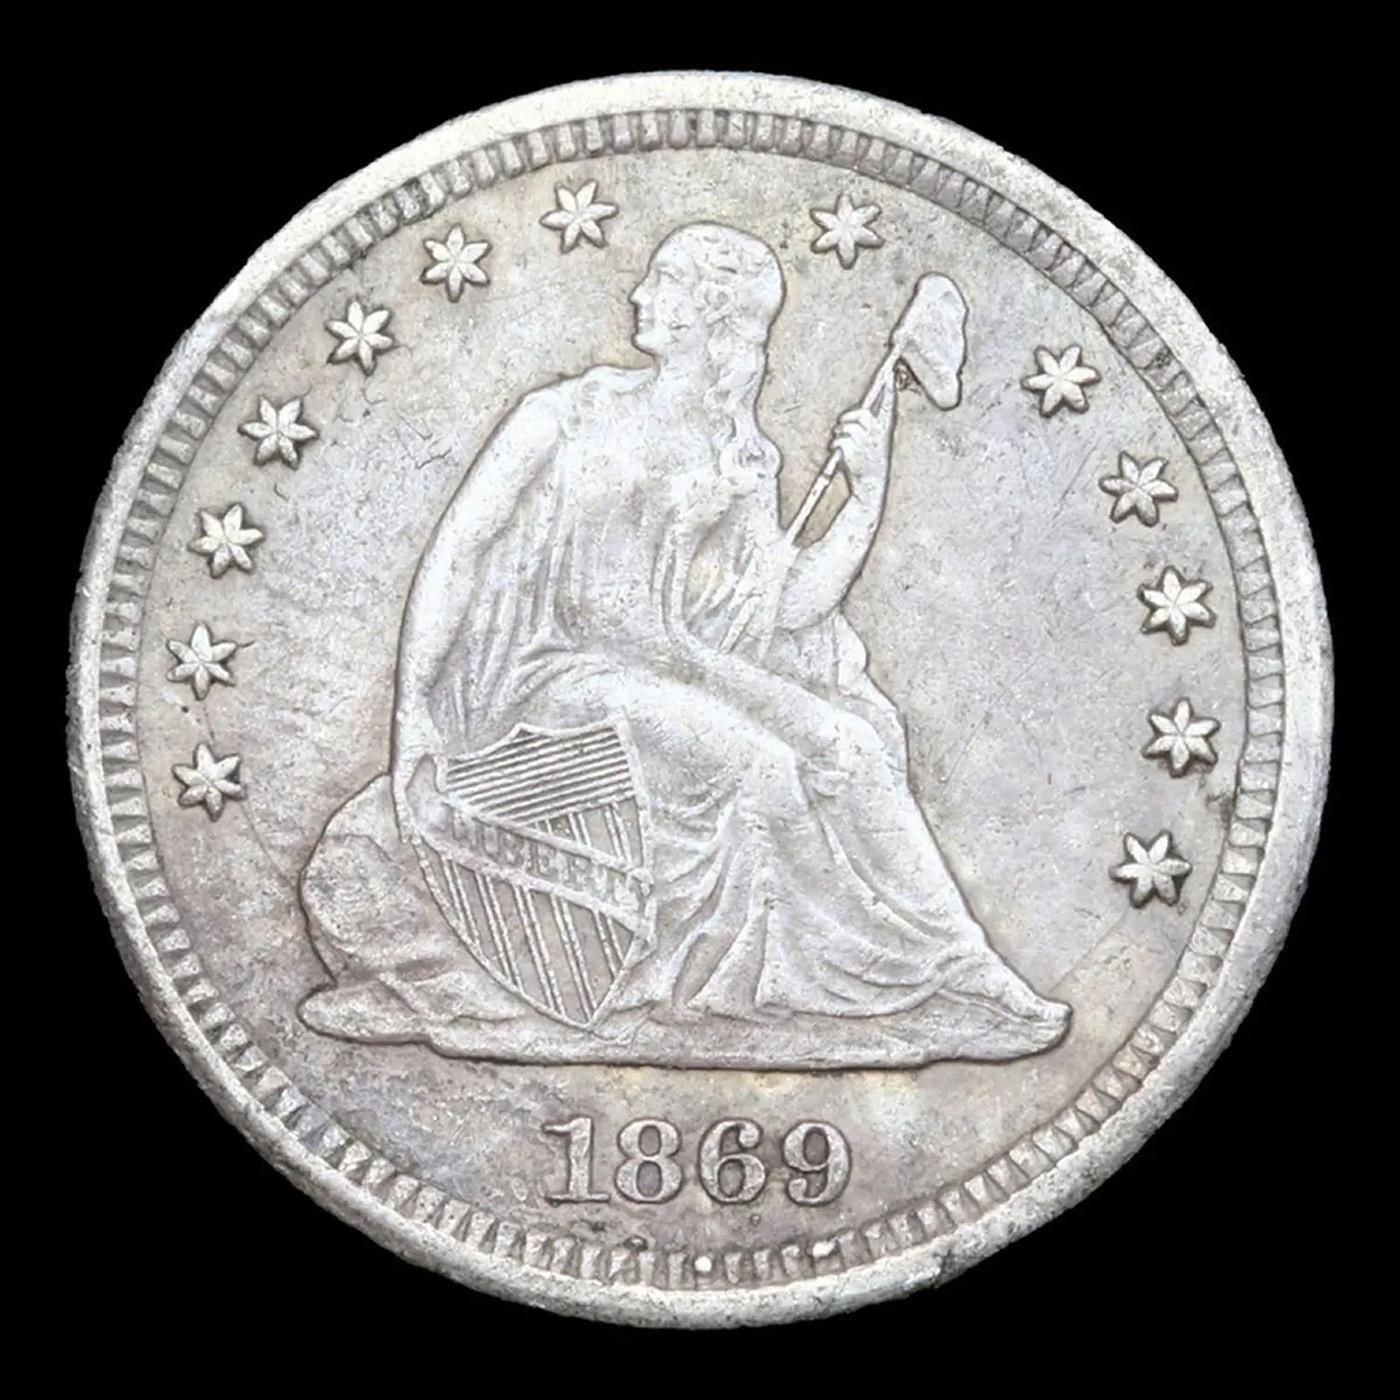 ***Auction Highlight*** 1869-s Seated Liberty Quarter 25c Graded ms62 details BY SEGS (fc)